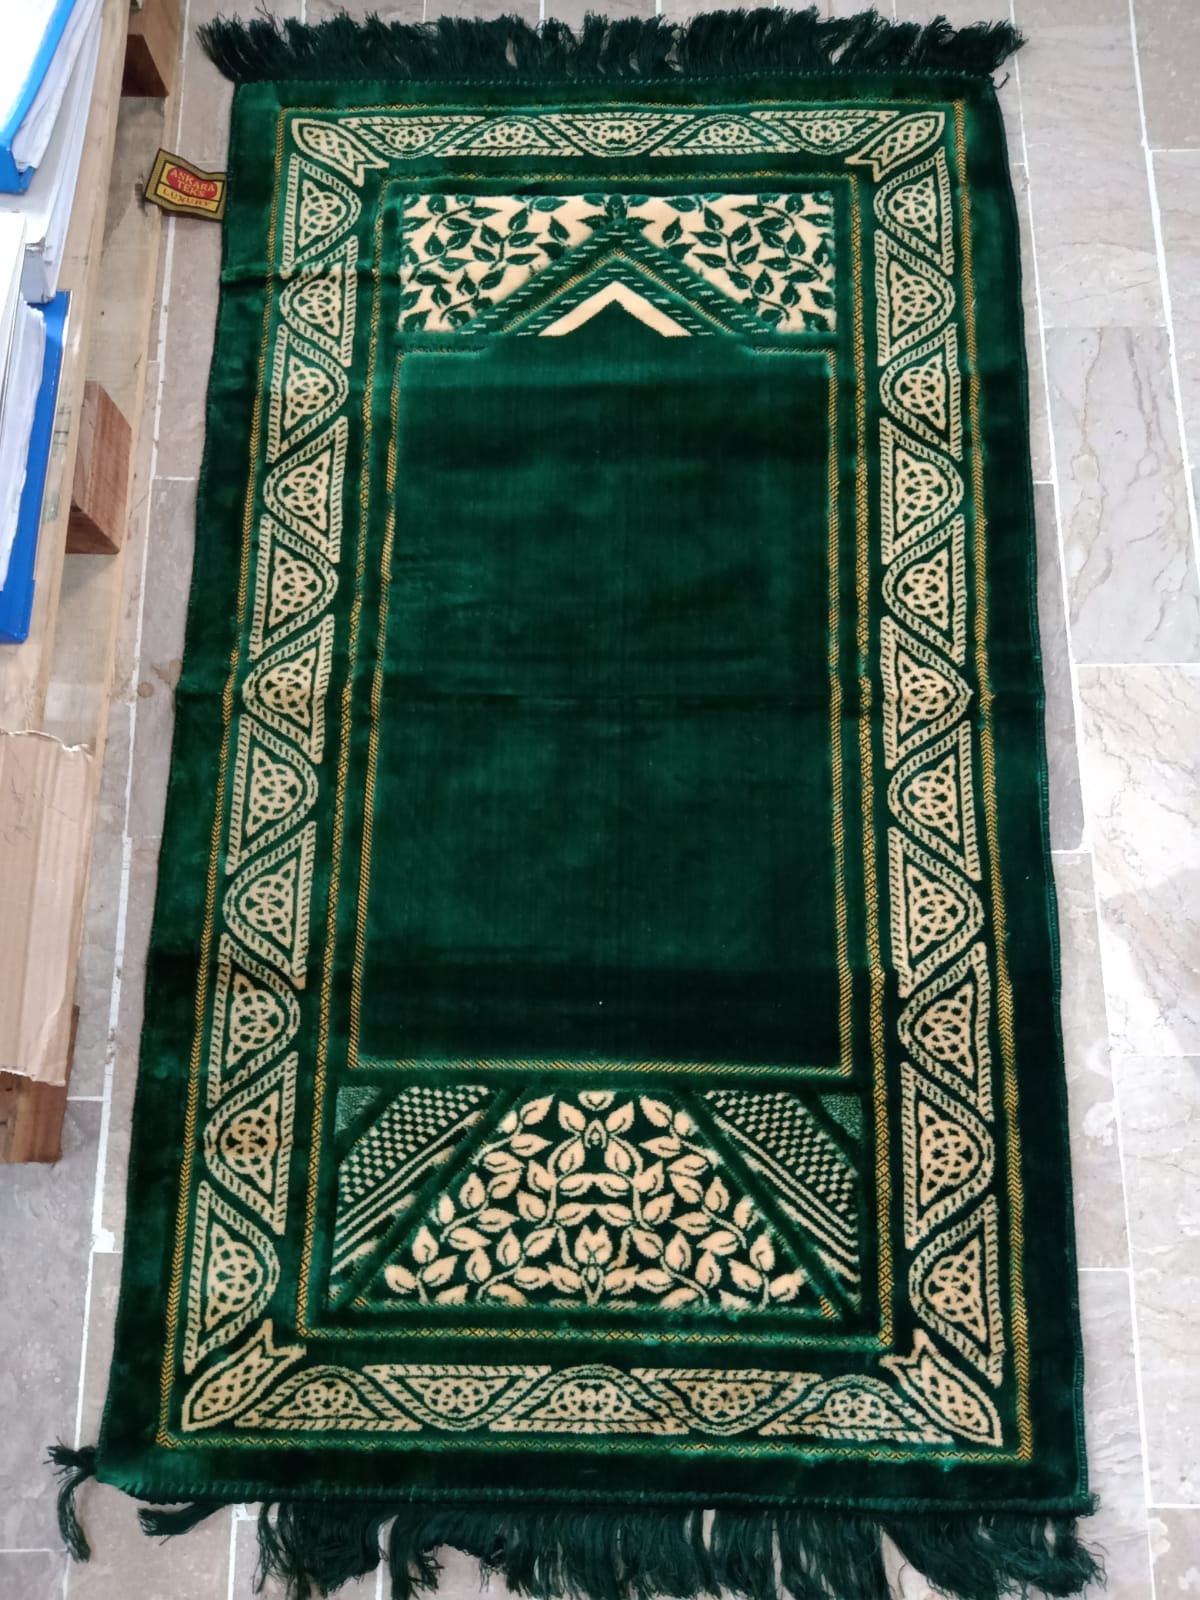 Luxury Butt Prayer Mats , Comfortable and High Quality Prayer mats. Available in different colors and designs. Order yours now from our website.